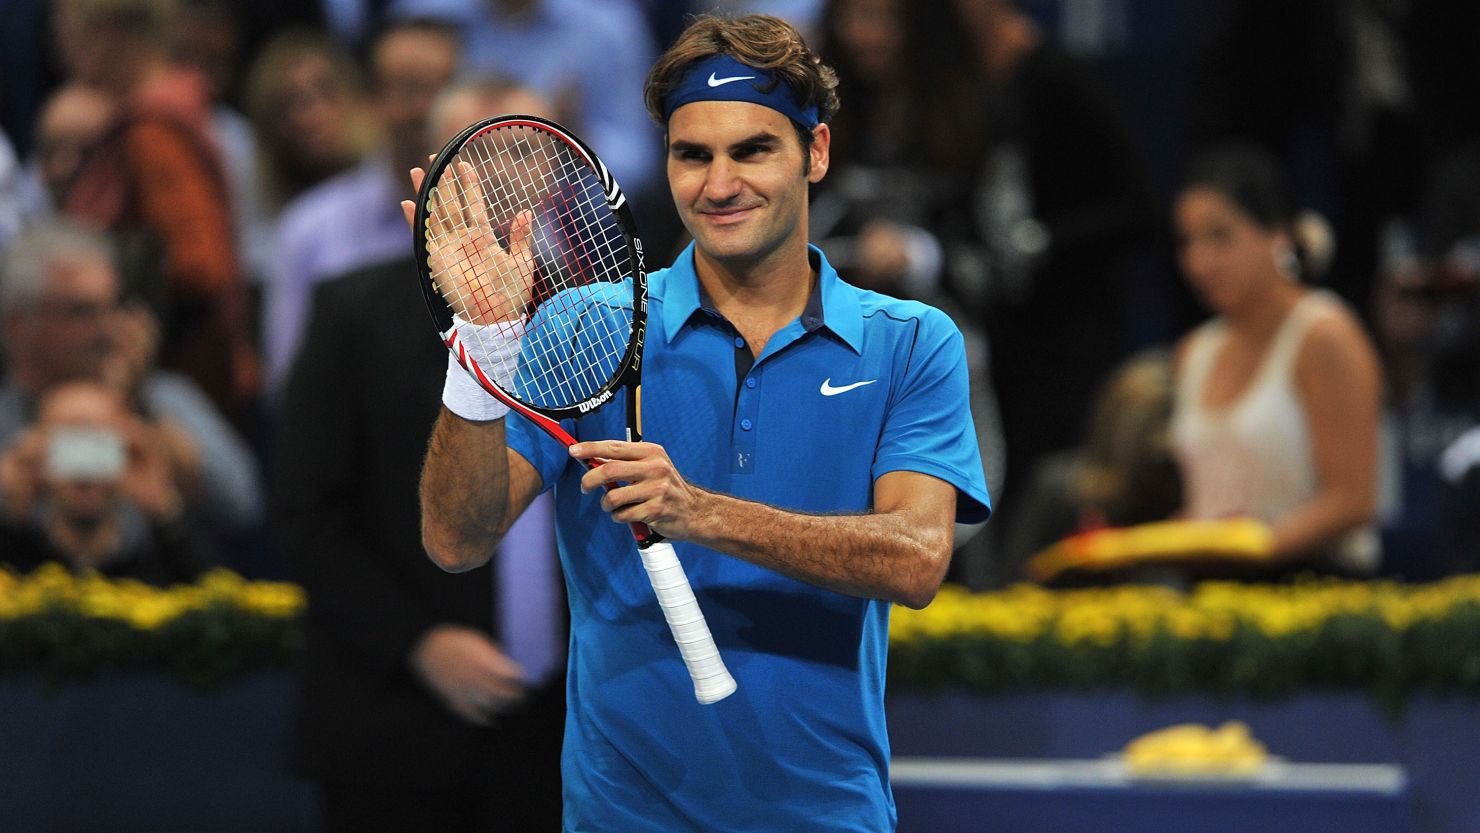 Roger Federer applauds his home crowd after winning his opening match in Basel.